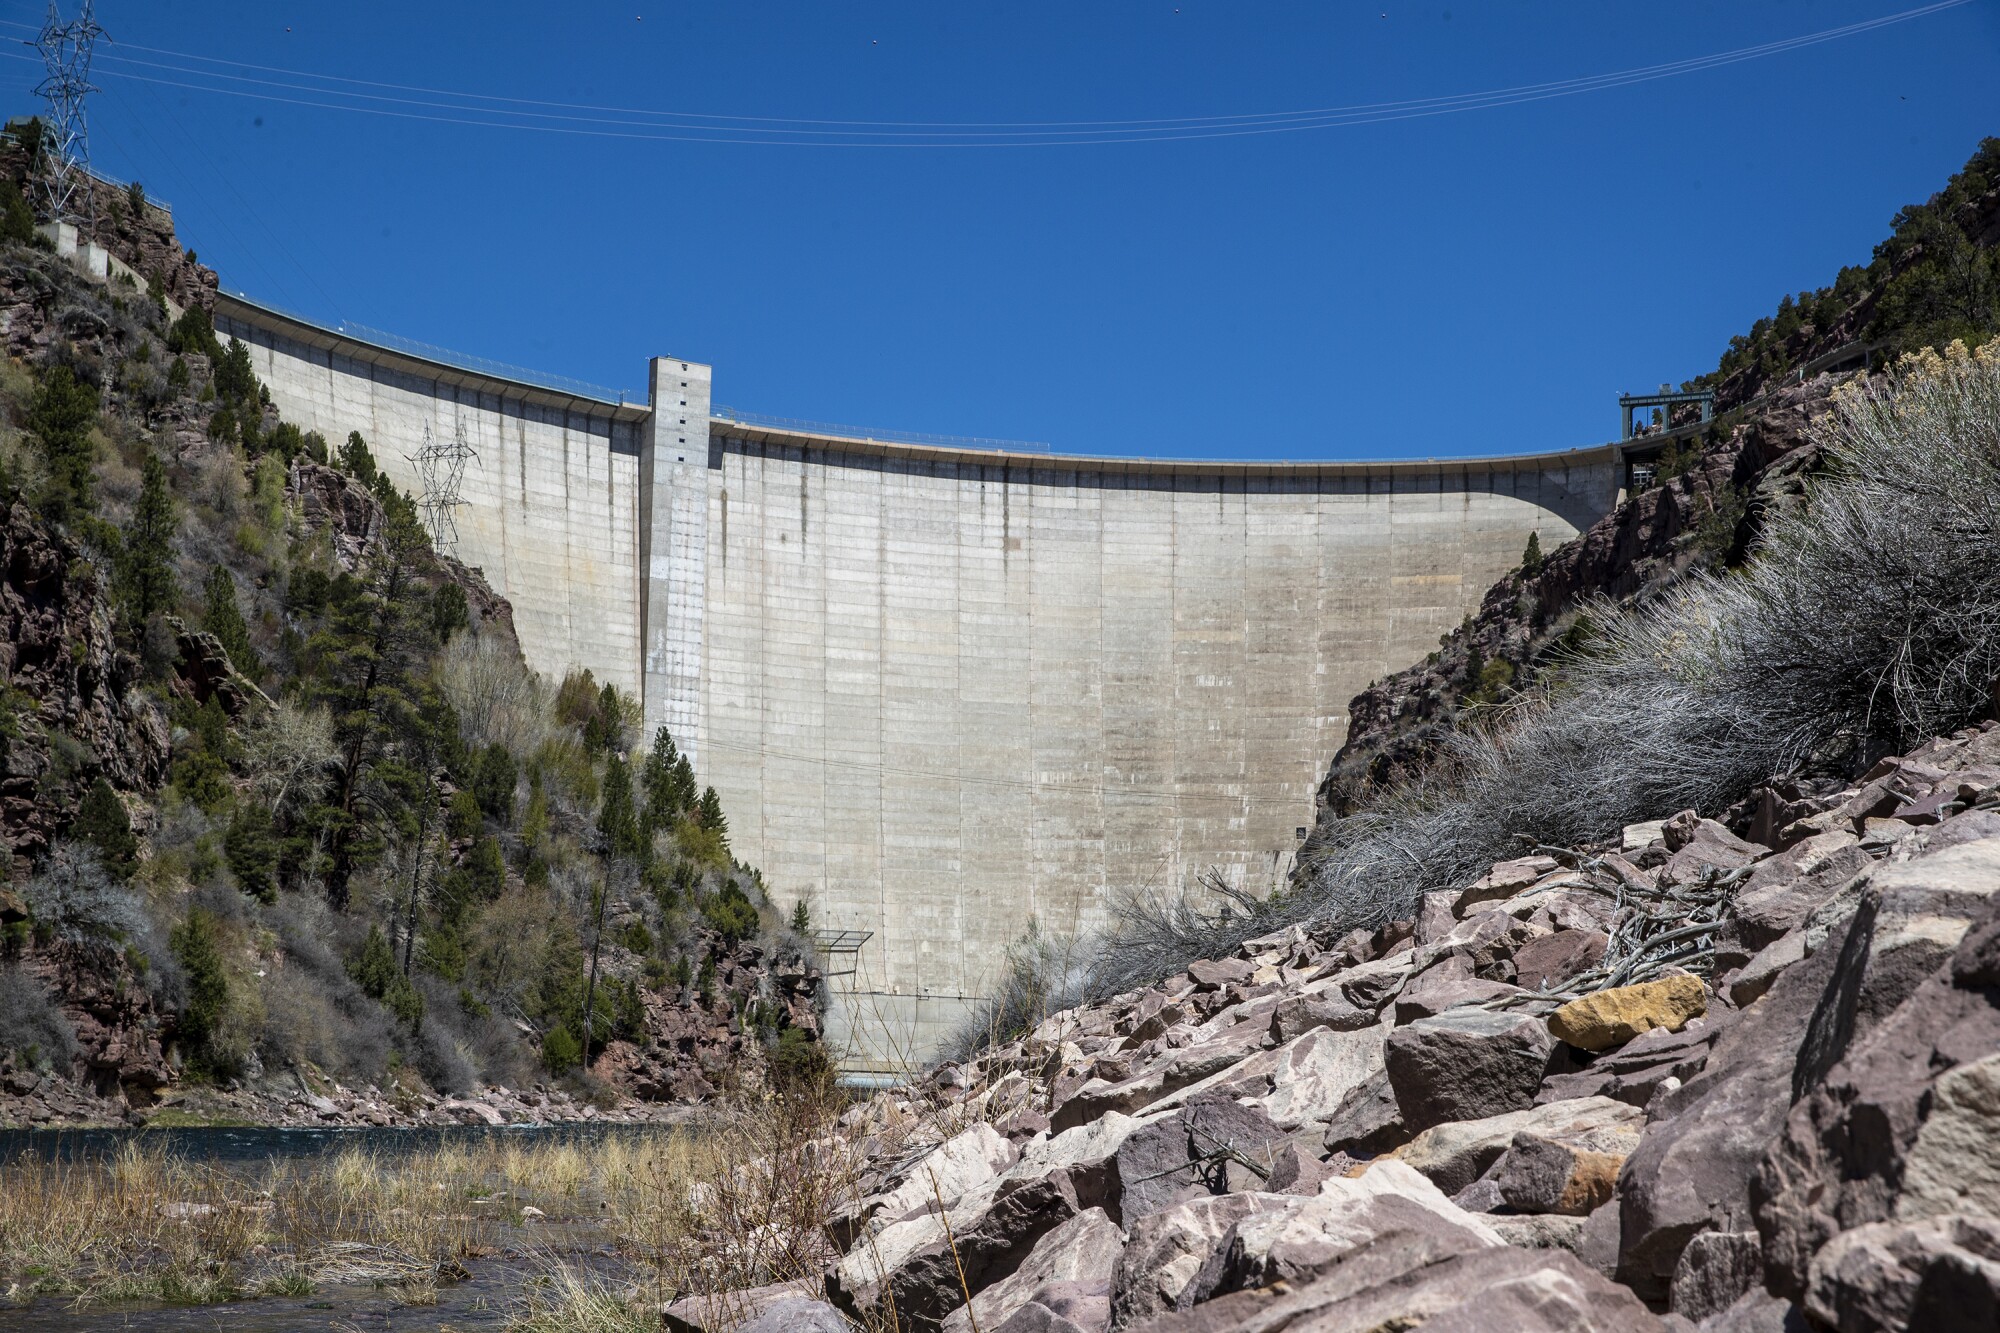 Flaming Gorge Dam interrupts the Green River, a tributary of the Colorado, in Daggett County, Utah.